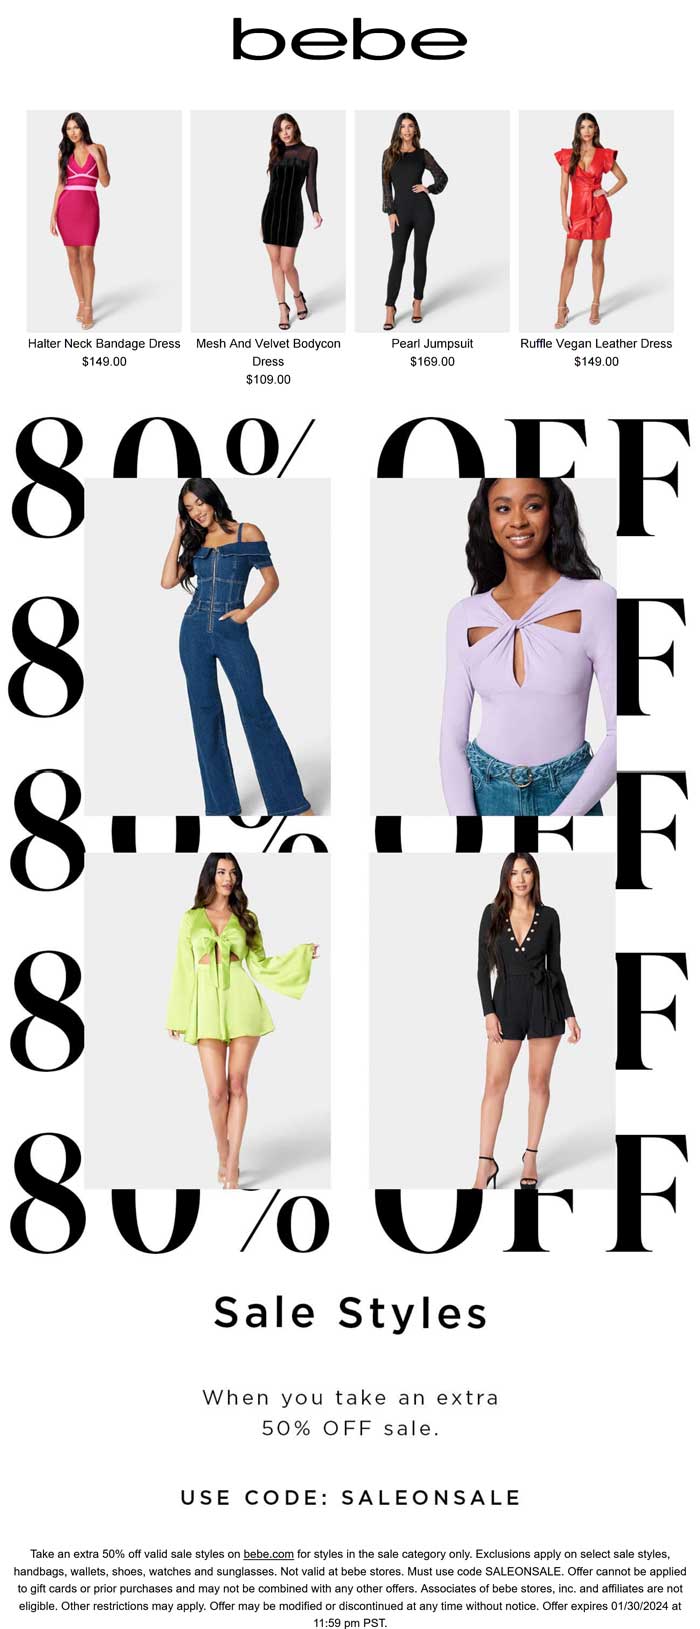 bebe stores Coupon  Extra 50% off sale styles online today at bebe via promo code SALEONSALE #bebe 